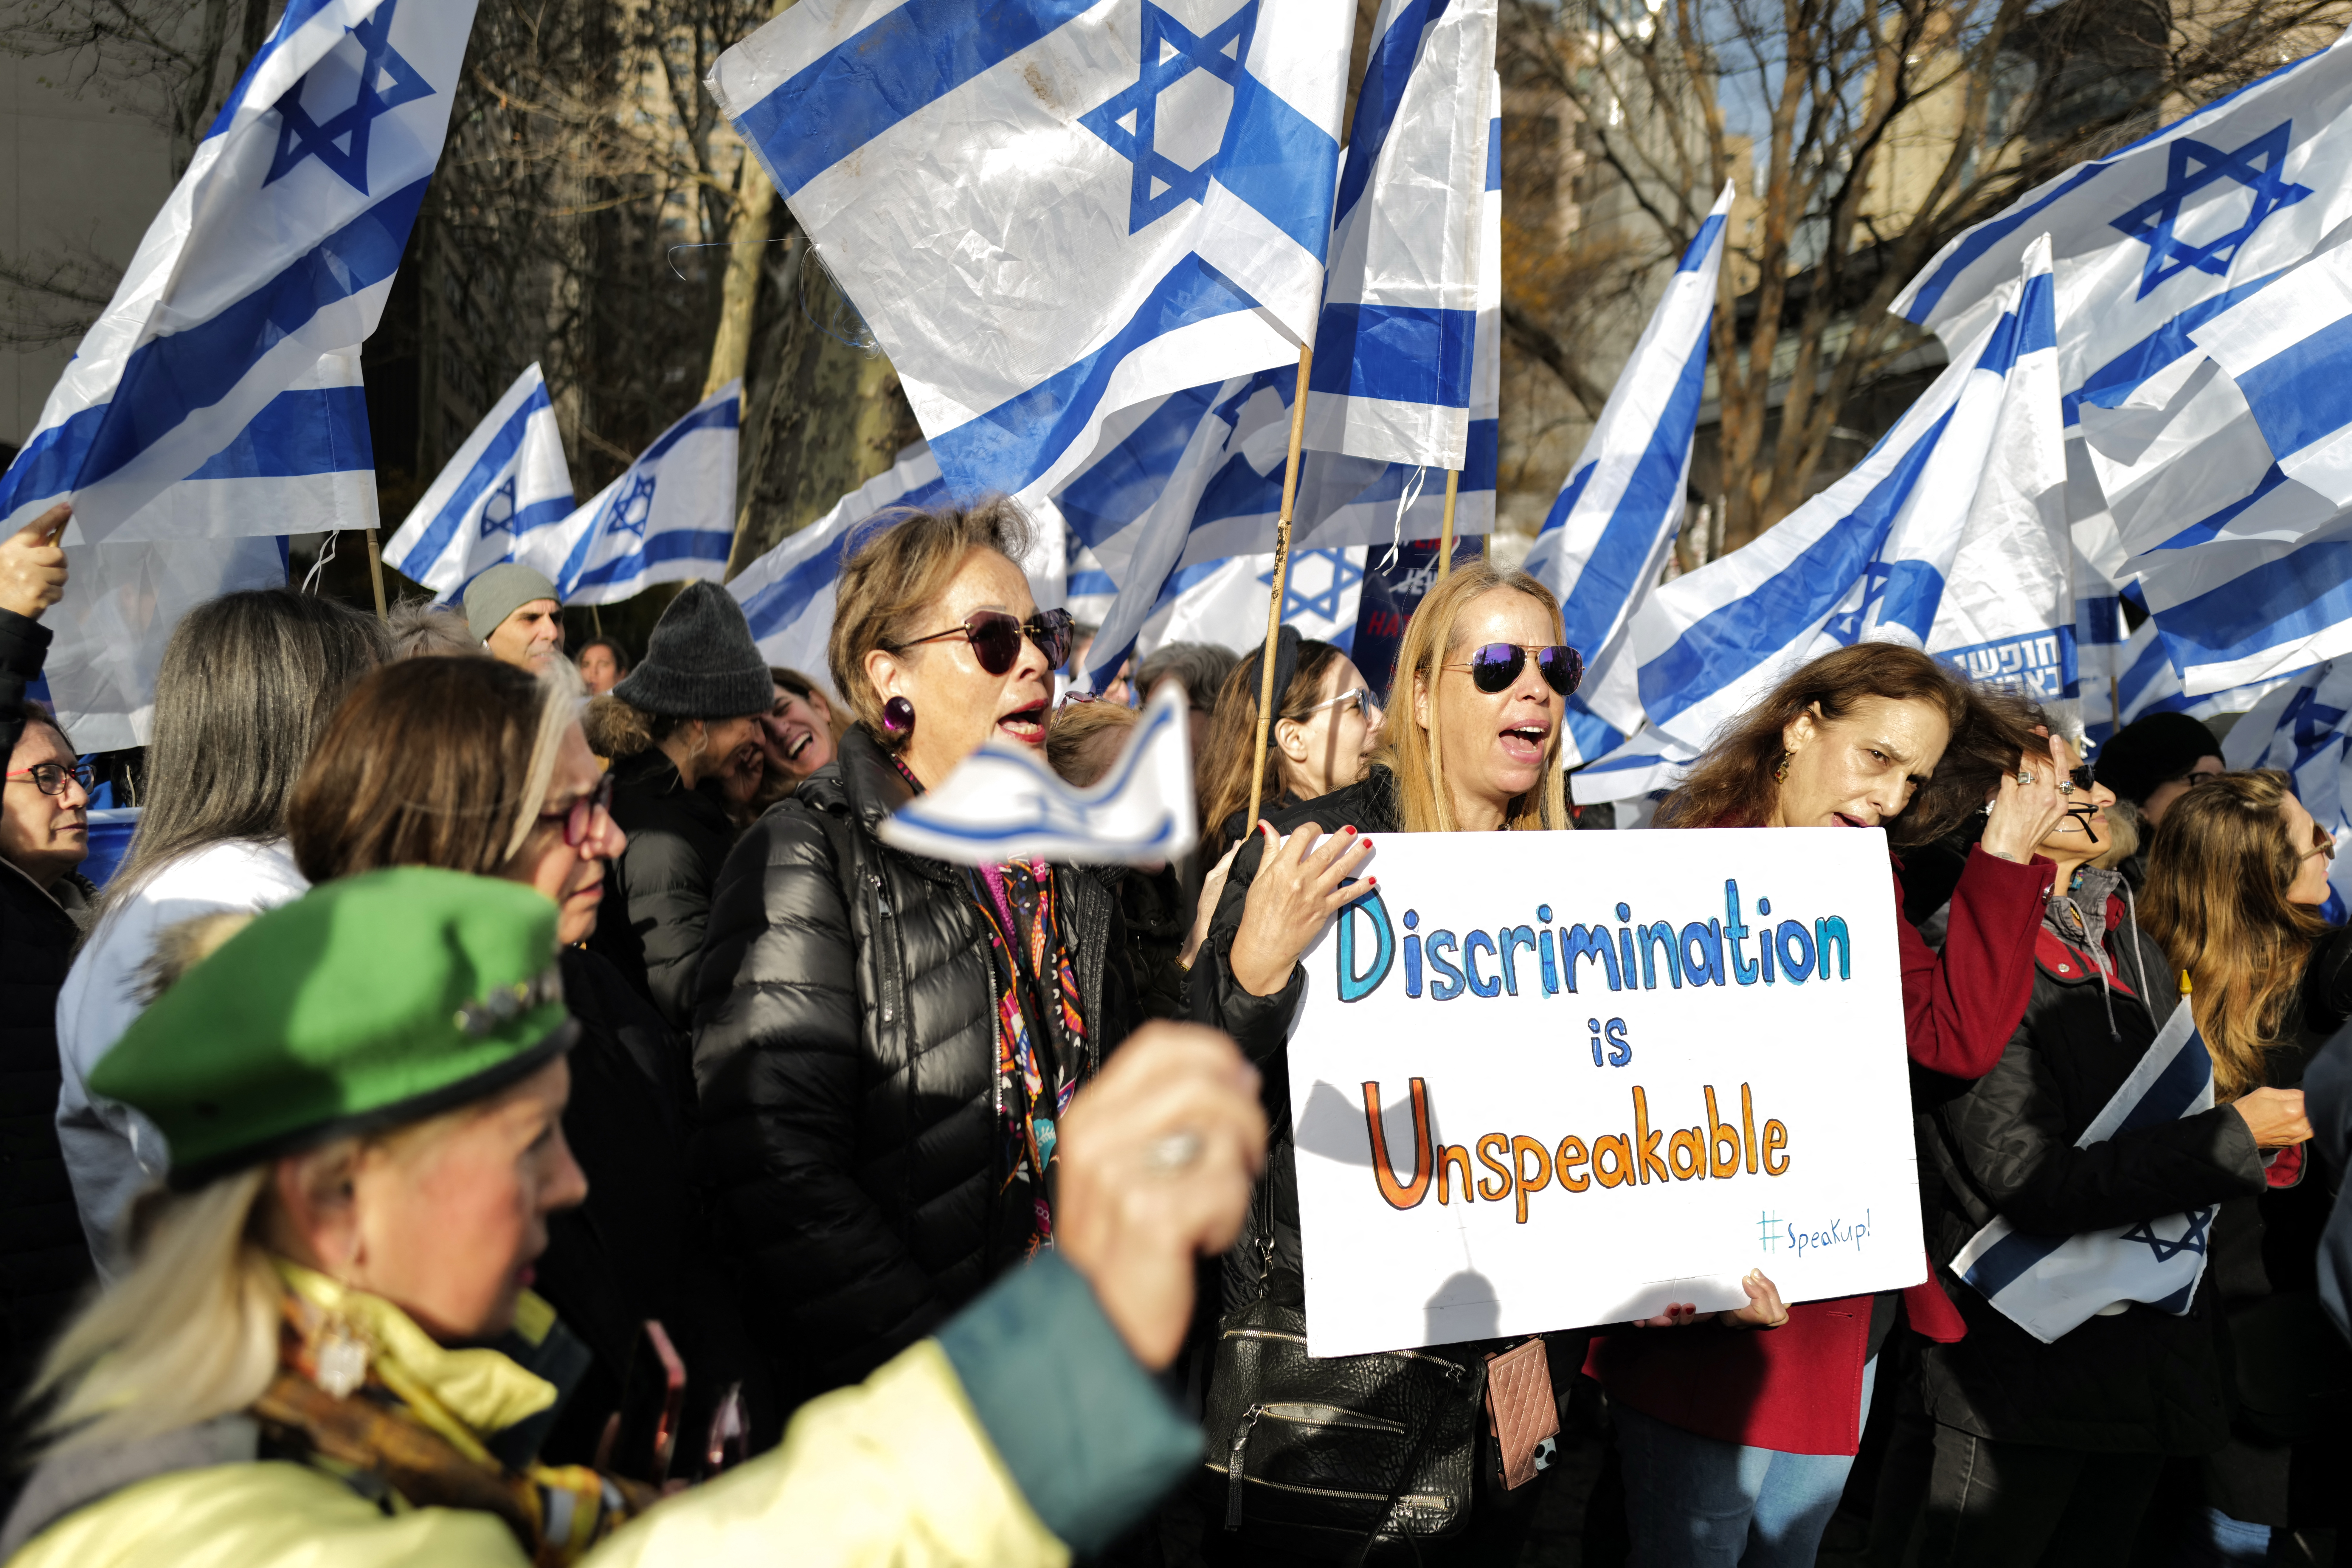 People stand with Israeli flags and signs at protest